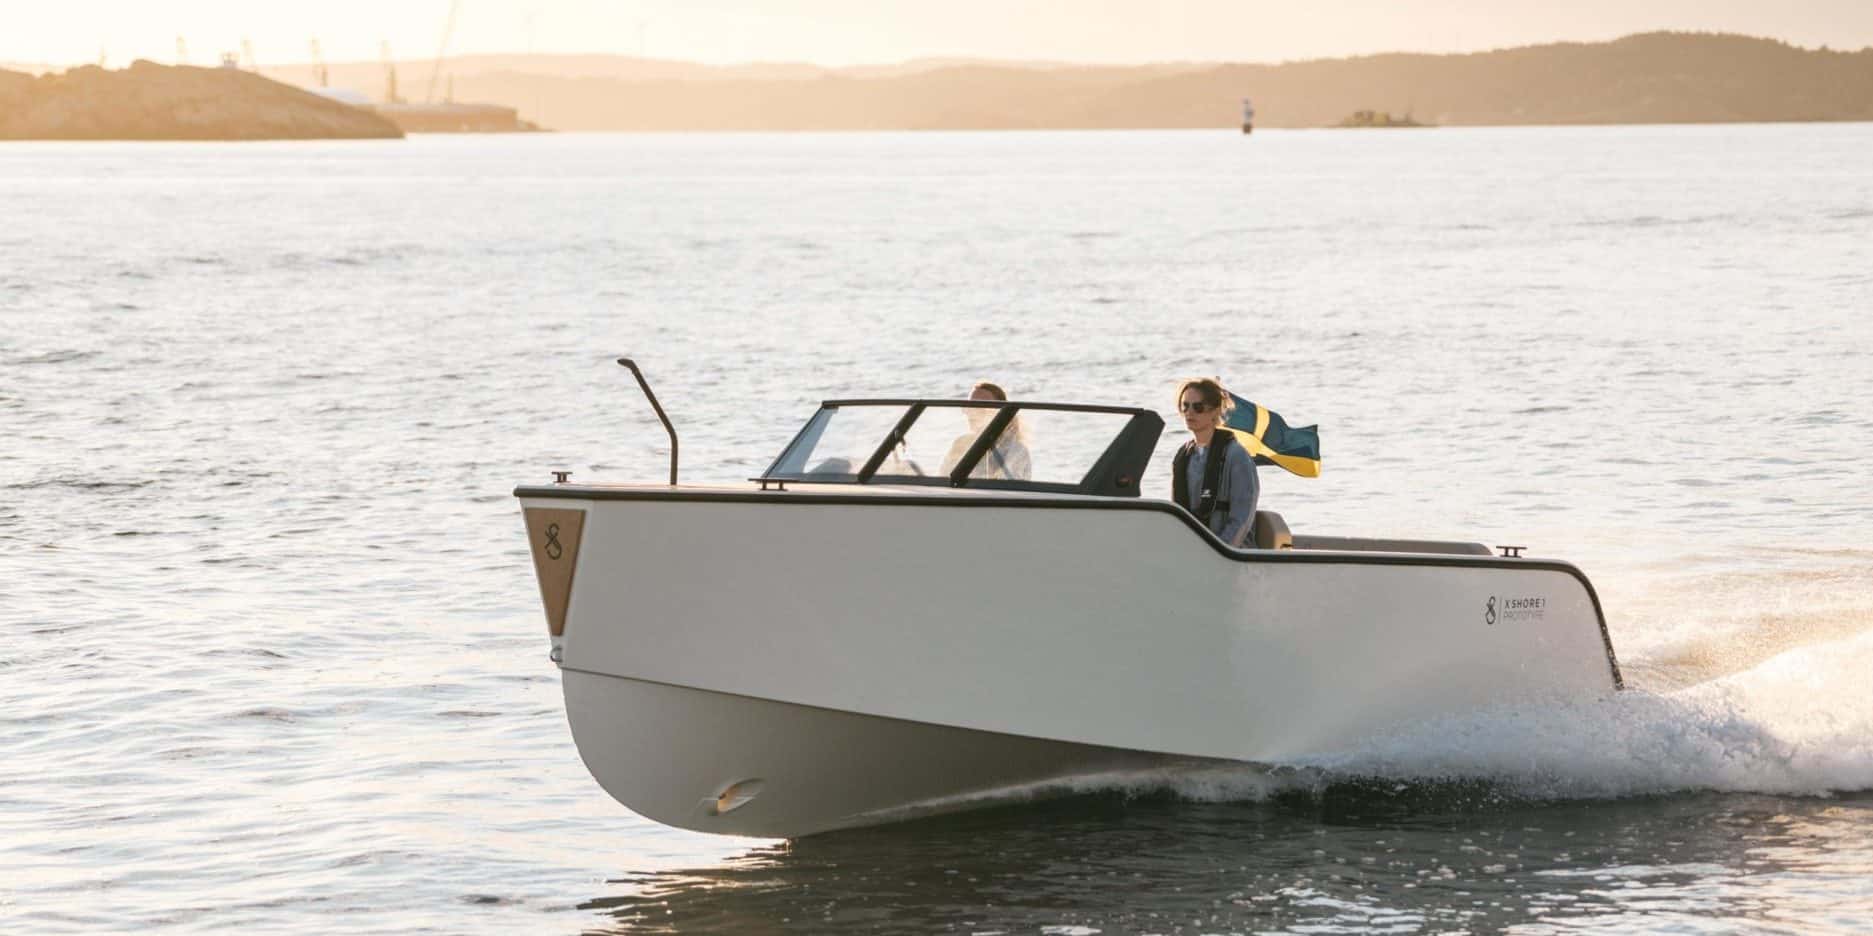 Swedish category leader x-shore continues to make sustainable electric boating a reality for a broader market